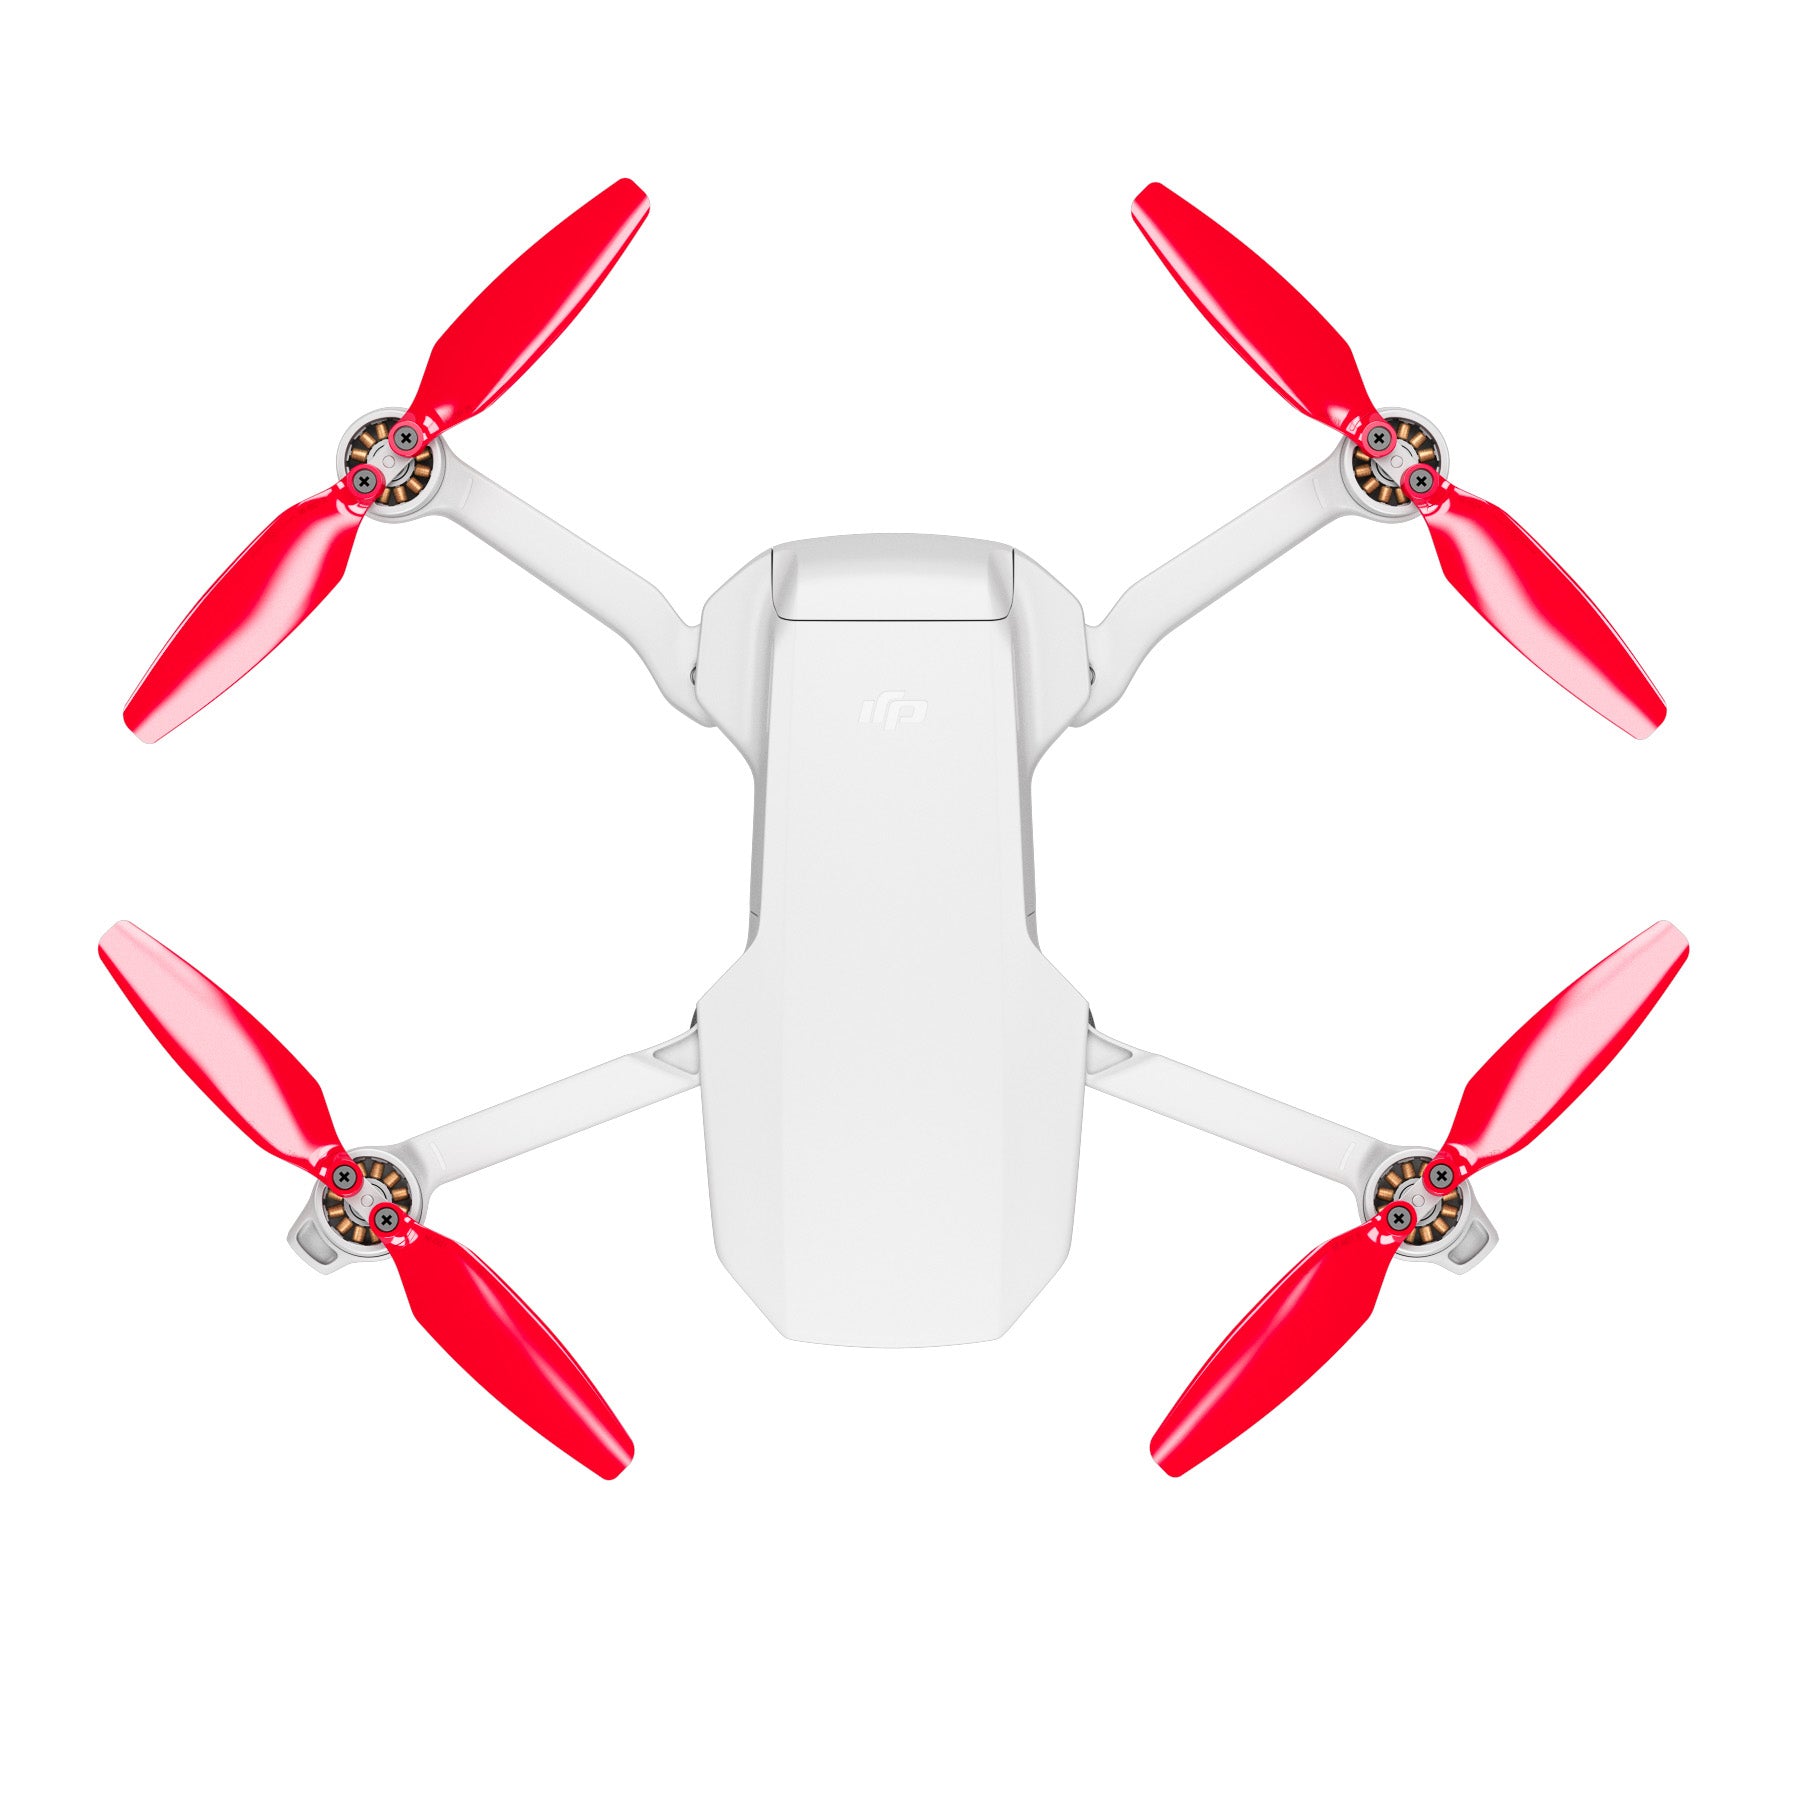 DJI Mini SE vs Mini 2 SE: How much more does this drone update get